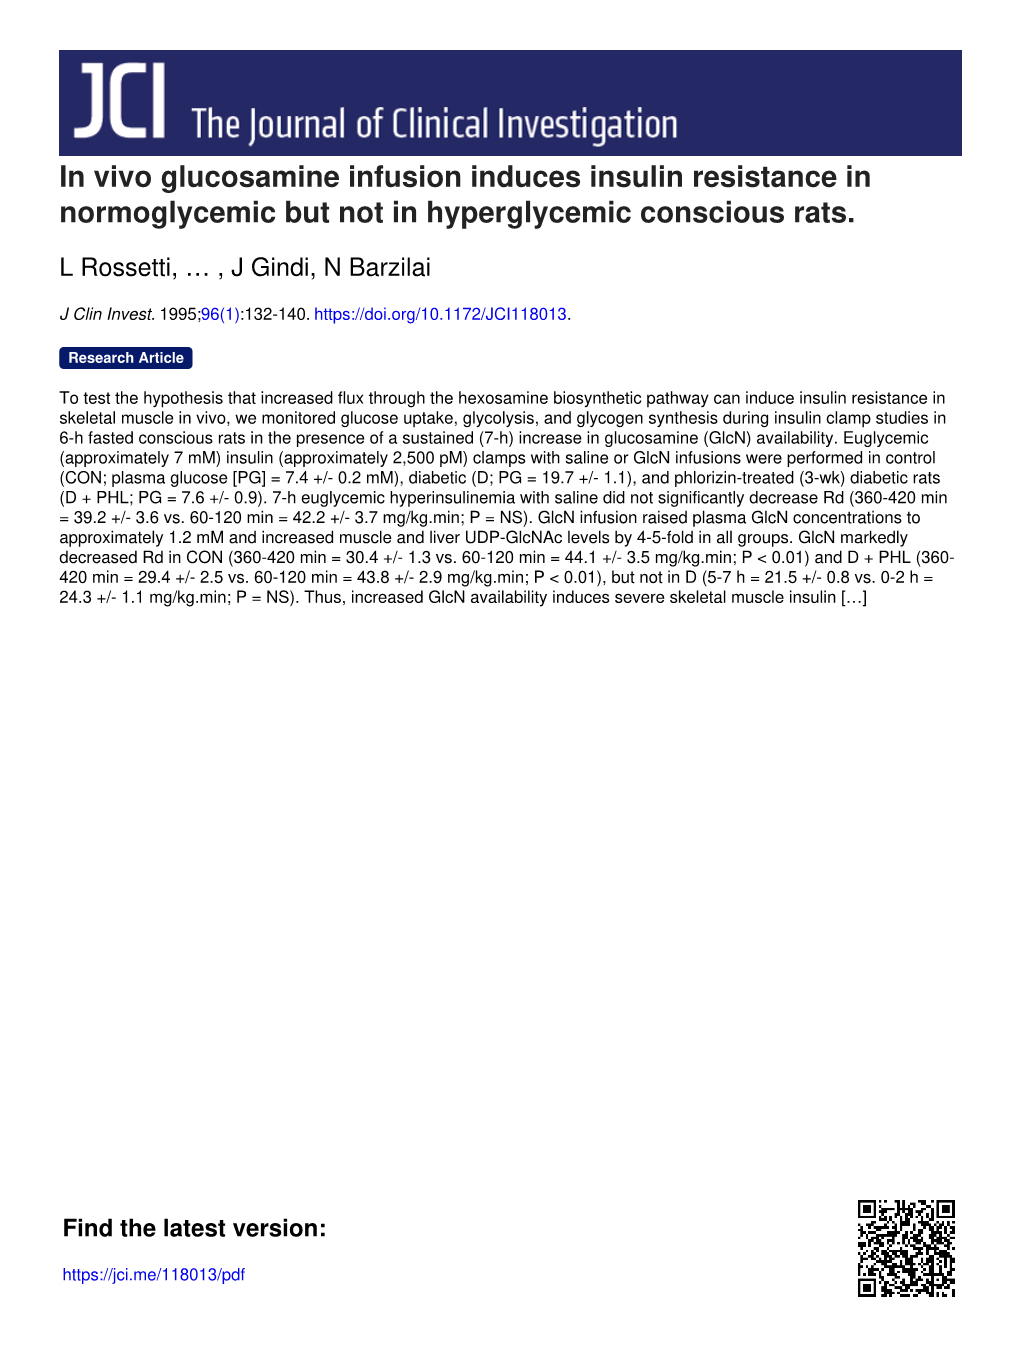 In Vivo Glucosamine Infusion Induces Insulin Resistance in Normoglycemic but Not in Hyperglycemic Conscious Rats